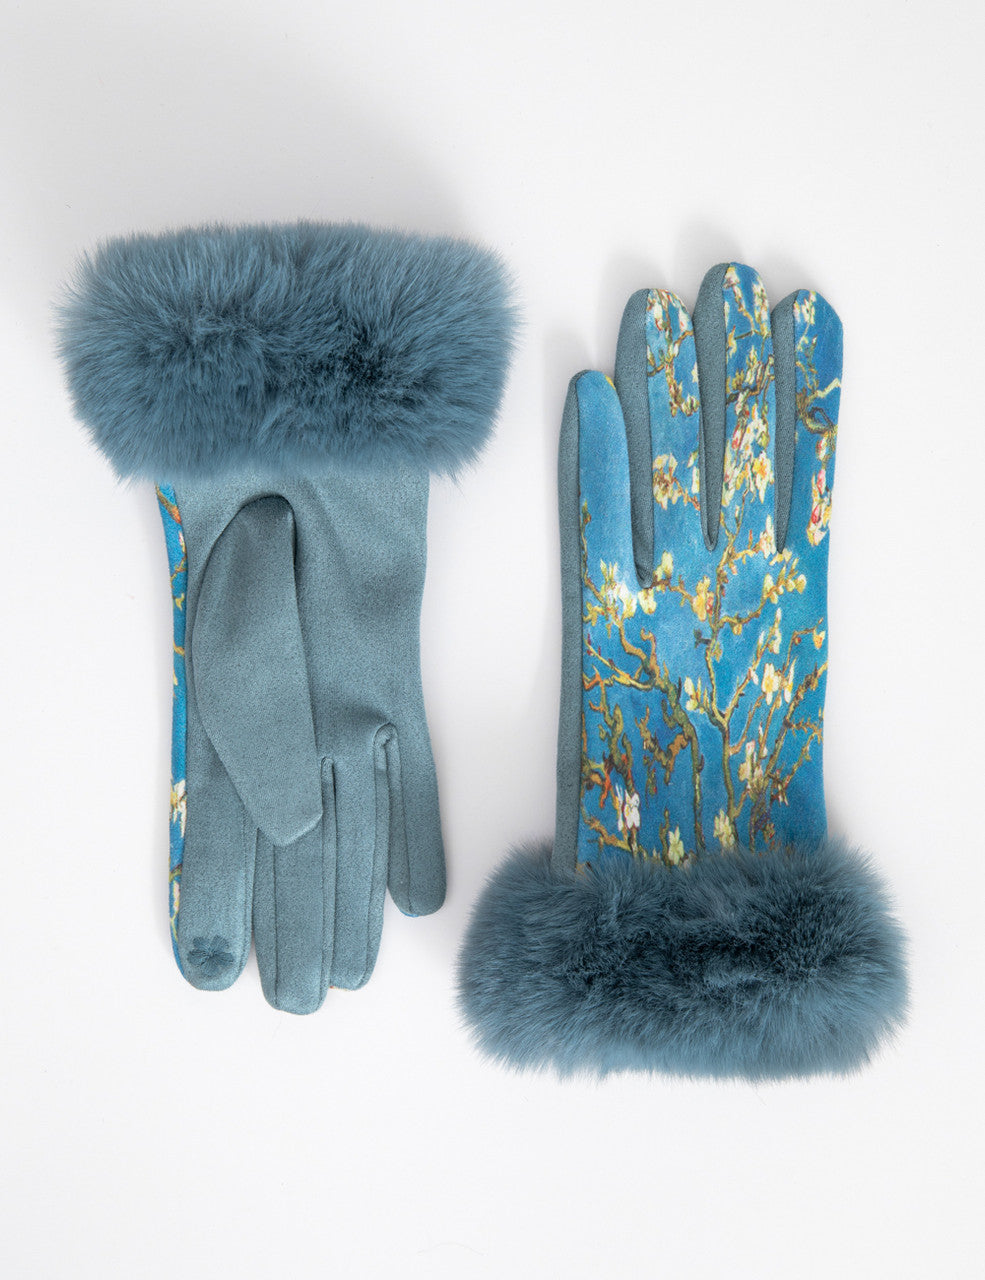 Teal Blue with Floral Print Texting Gloves